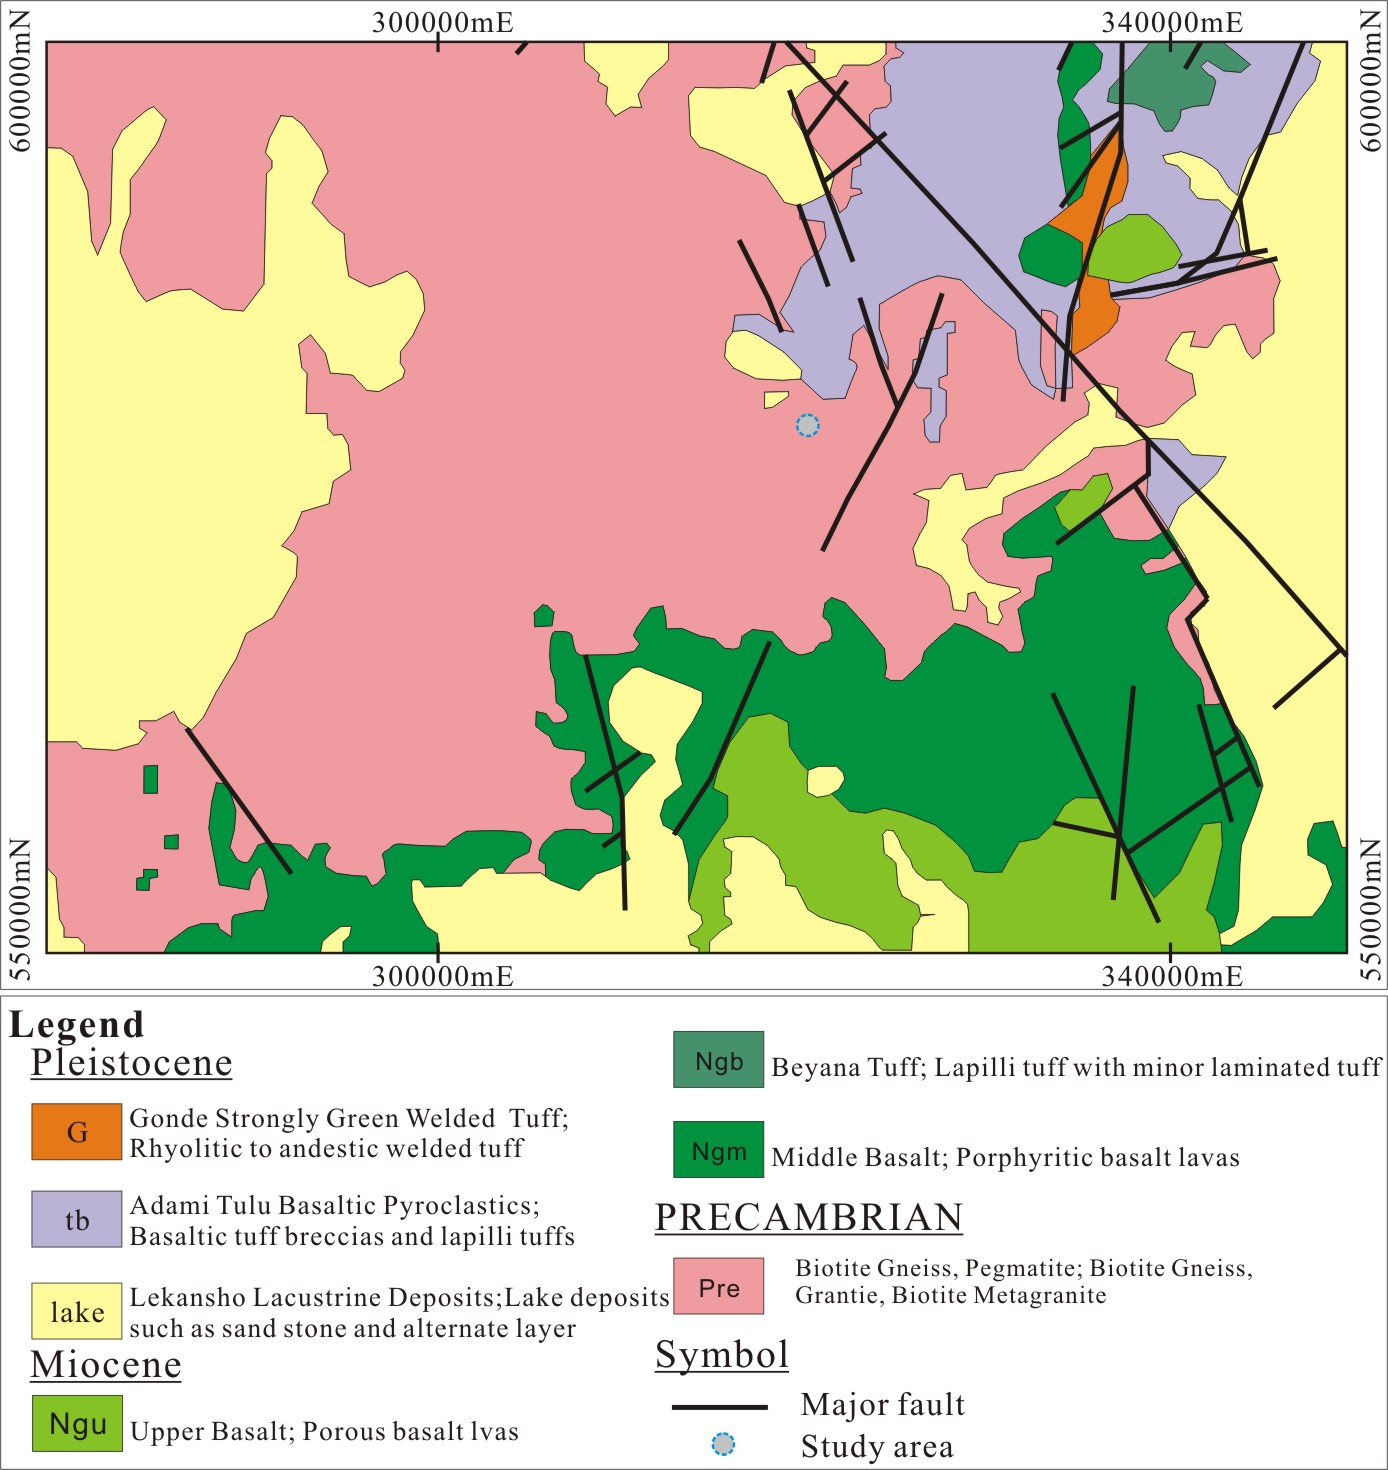 Fig. 1-26. The geologic map showing the geology and location of the pegmatite in Konso area.